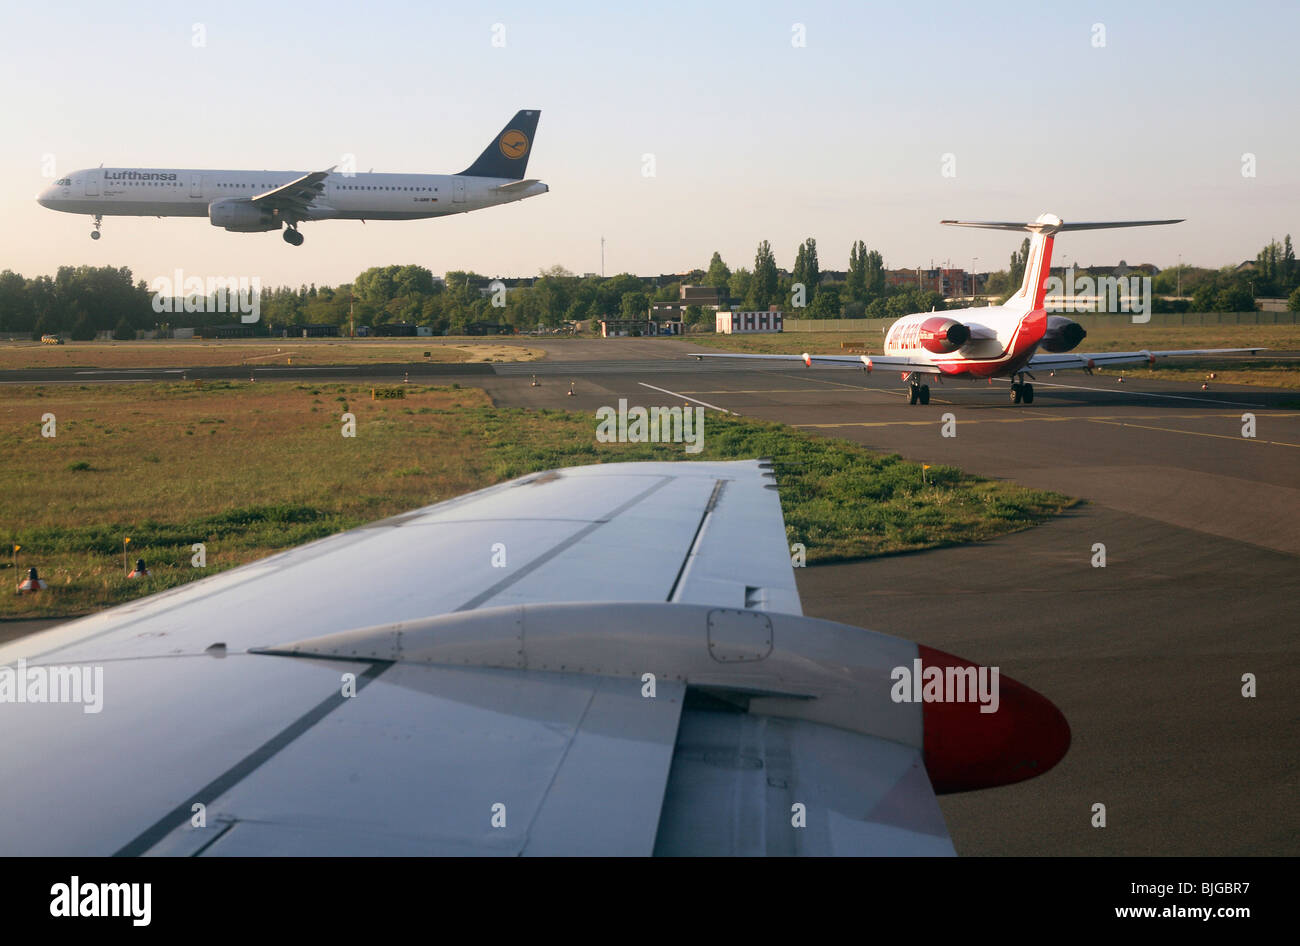 Aircrafts on the runway of the Tegel Airport, Berlin, Germany Stock Photo